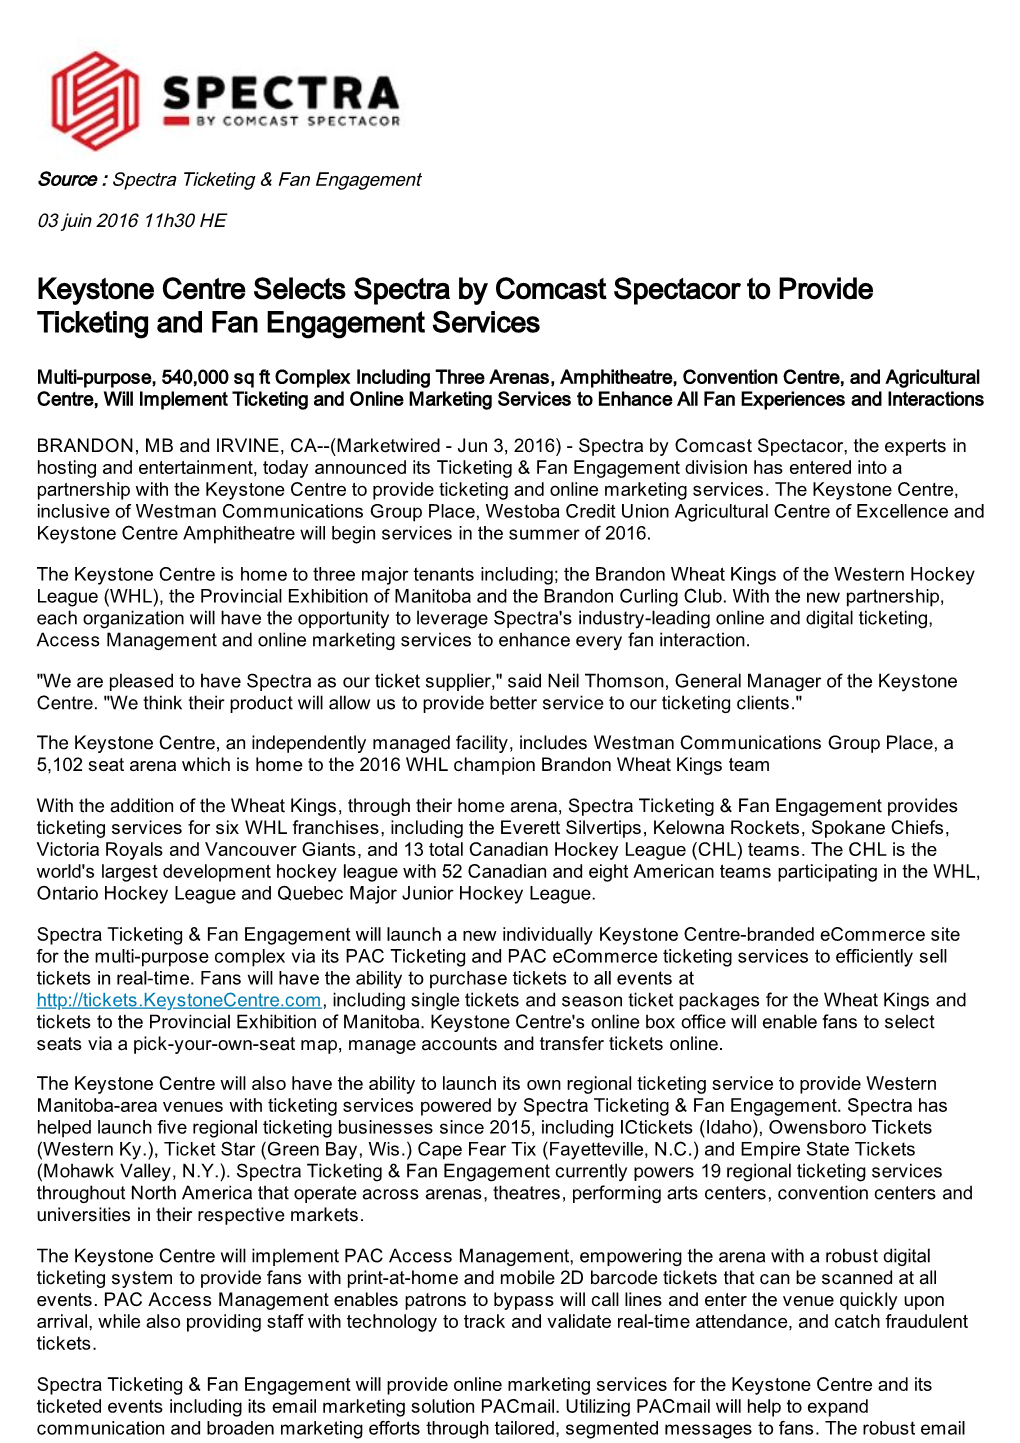 Keystone Centre Selects Spectra by Comcast Spectacor to Provide Ticketing and Fan Engagement Services